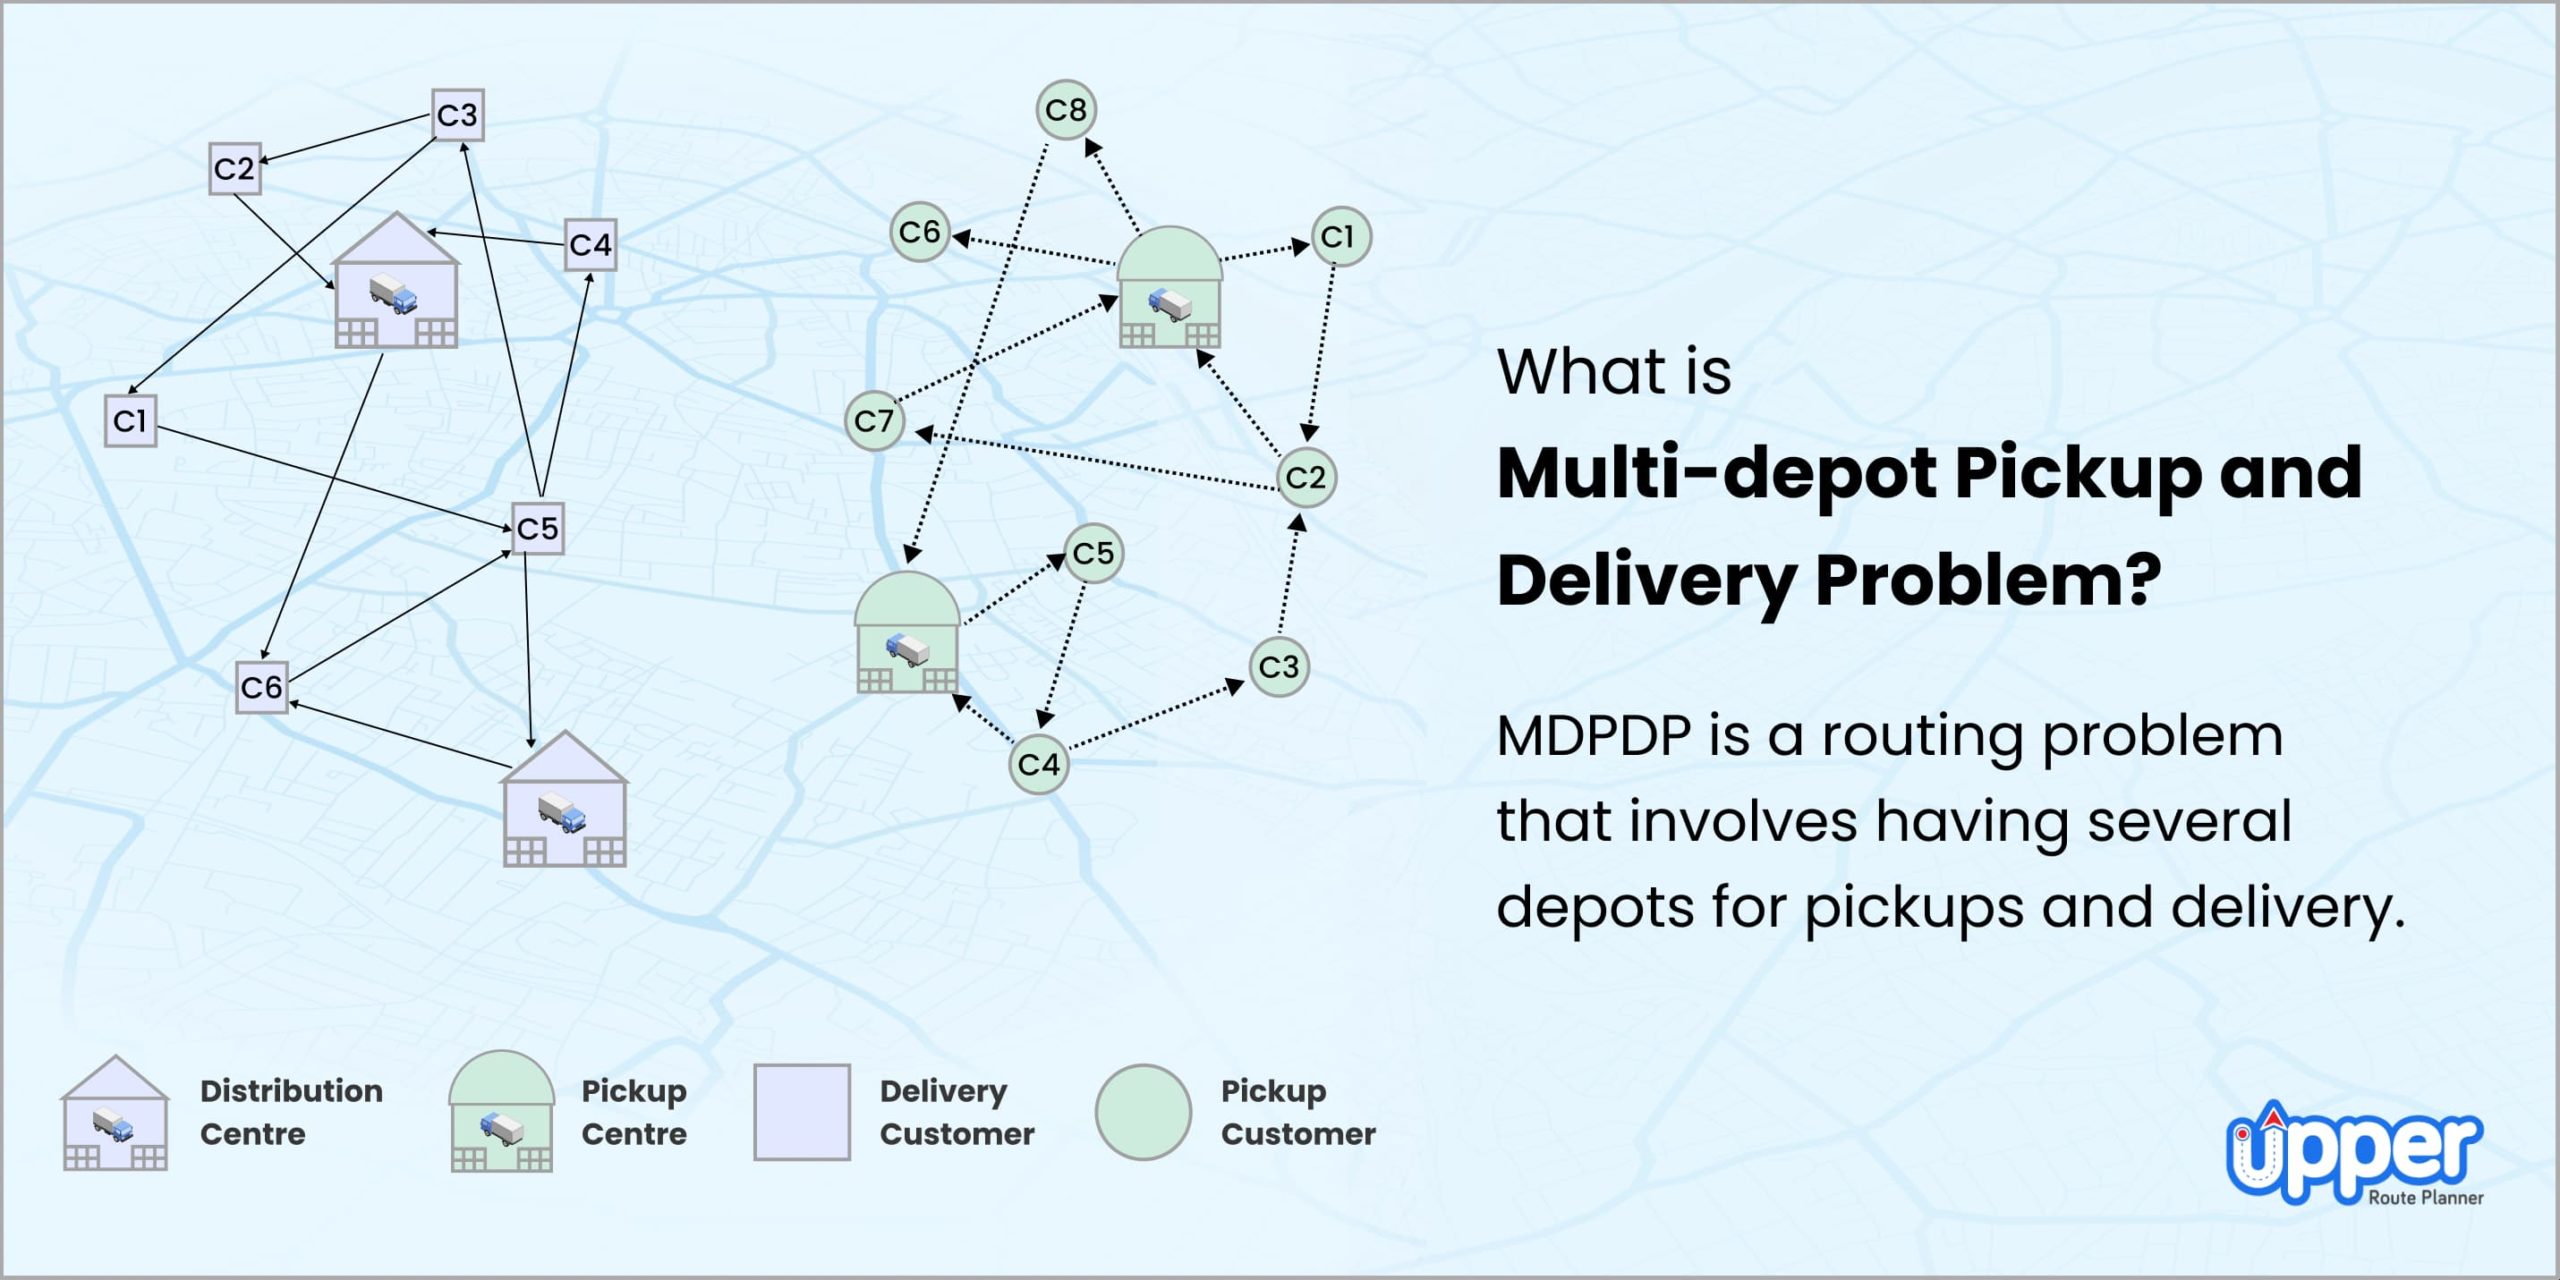 What is multi-depot pickup and delivery problem